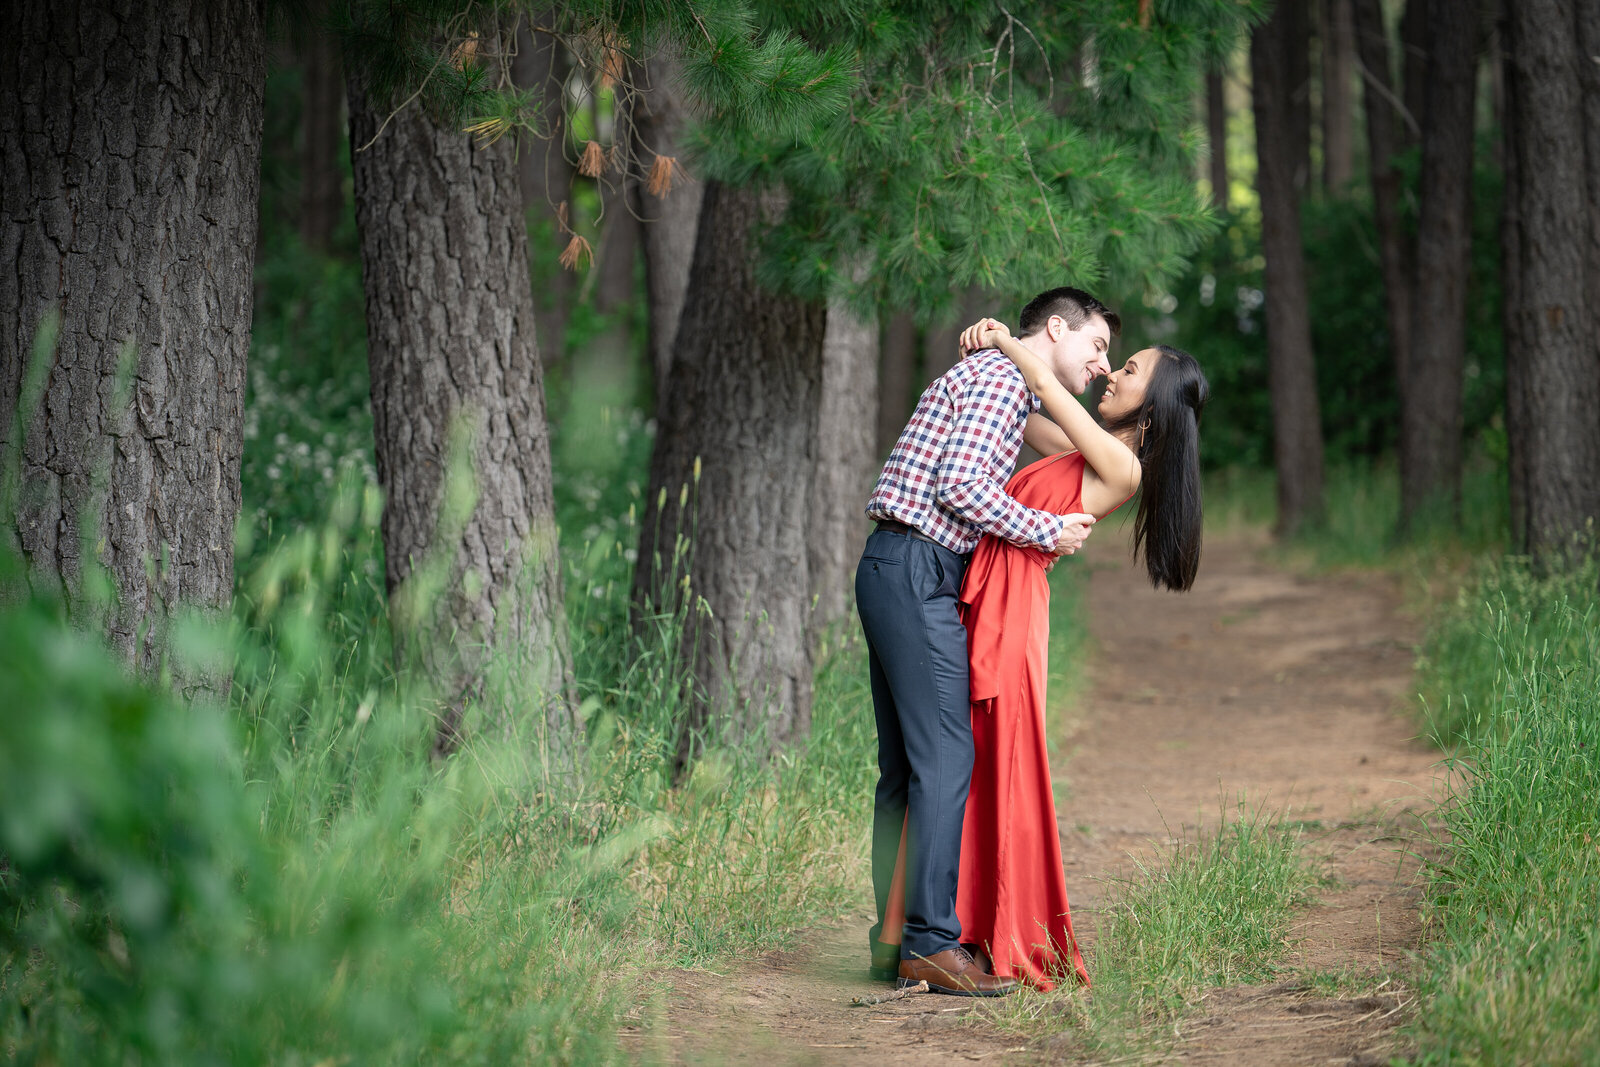 Adelaide_DreamTeamImaging_Engagement_Photography_17